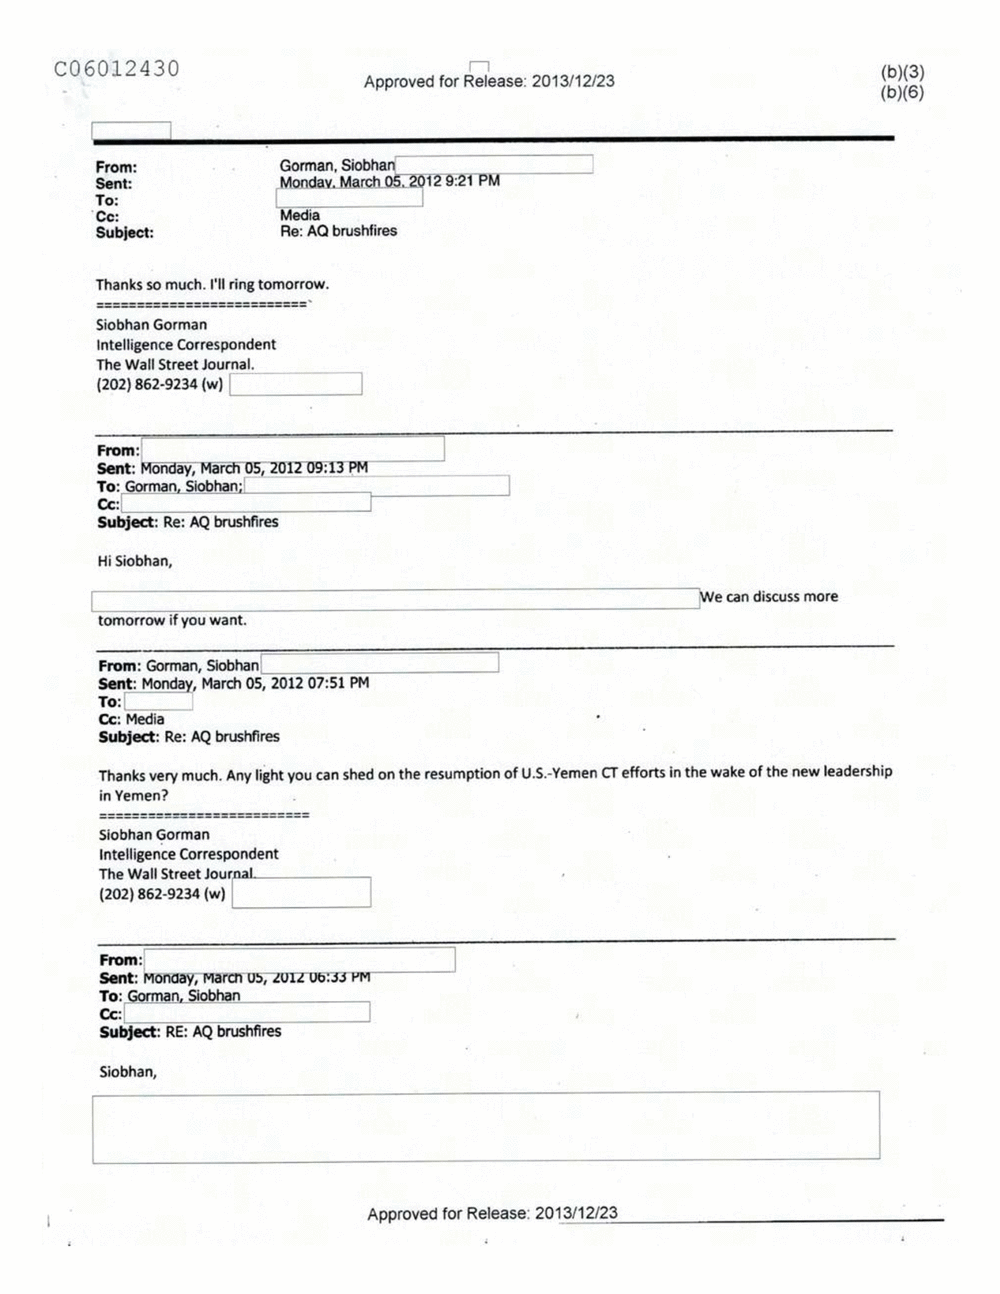 Page 6 from Email Correspondence Between Reporters and CIA Flacks